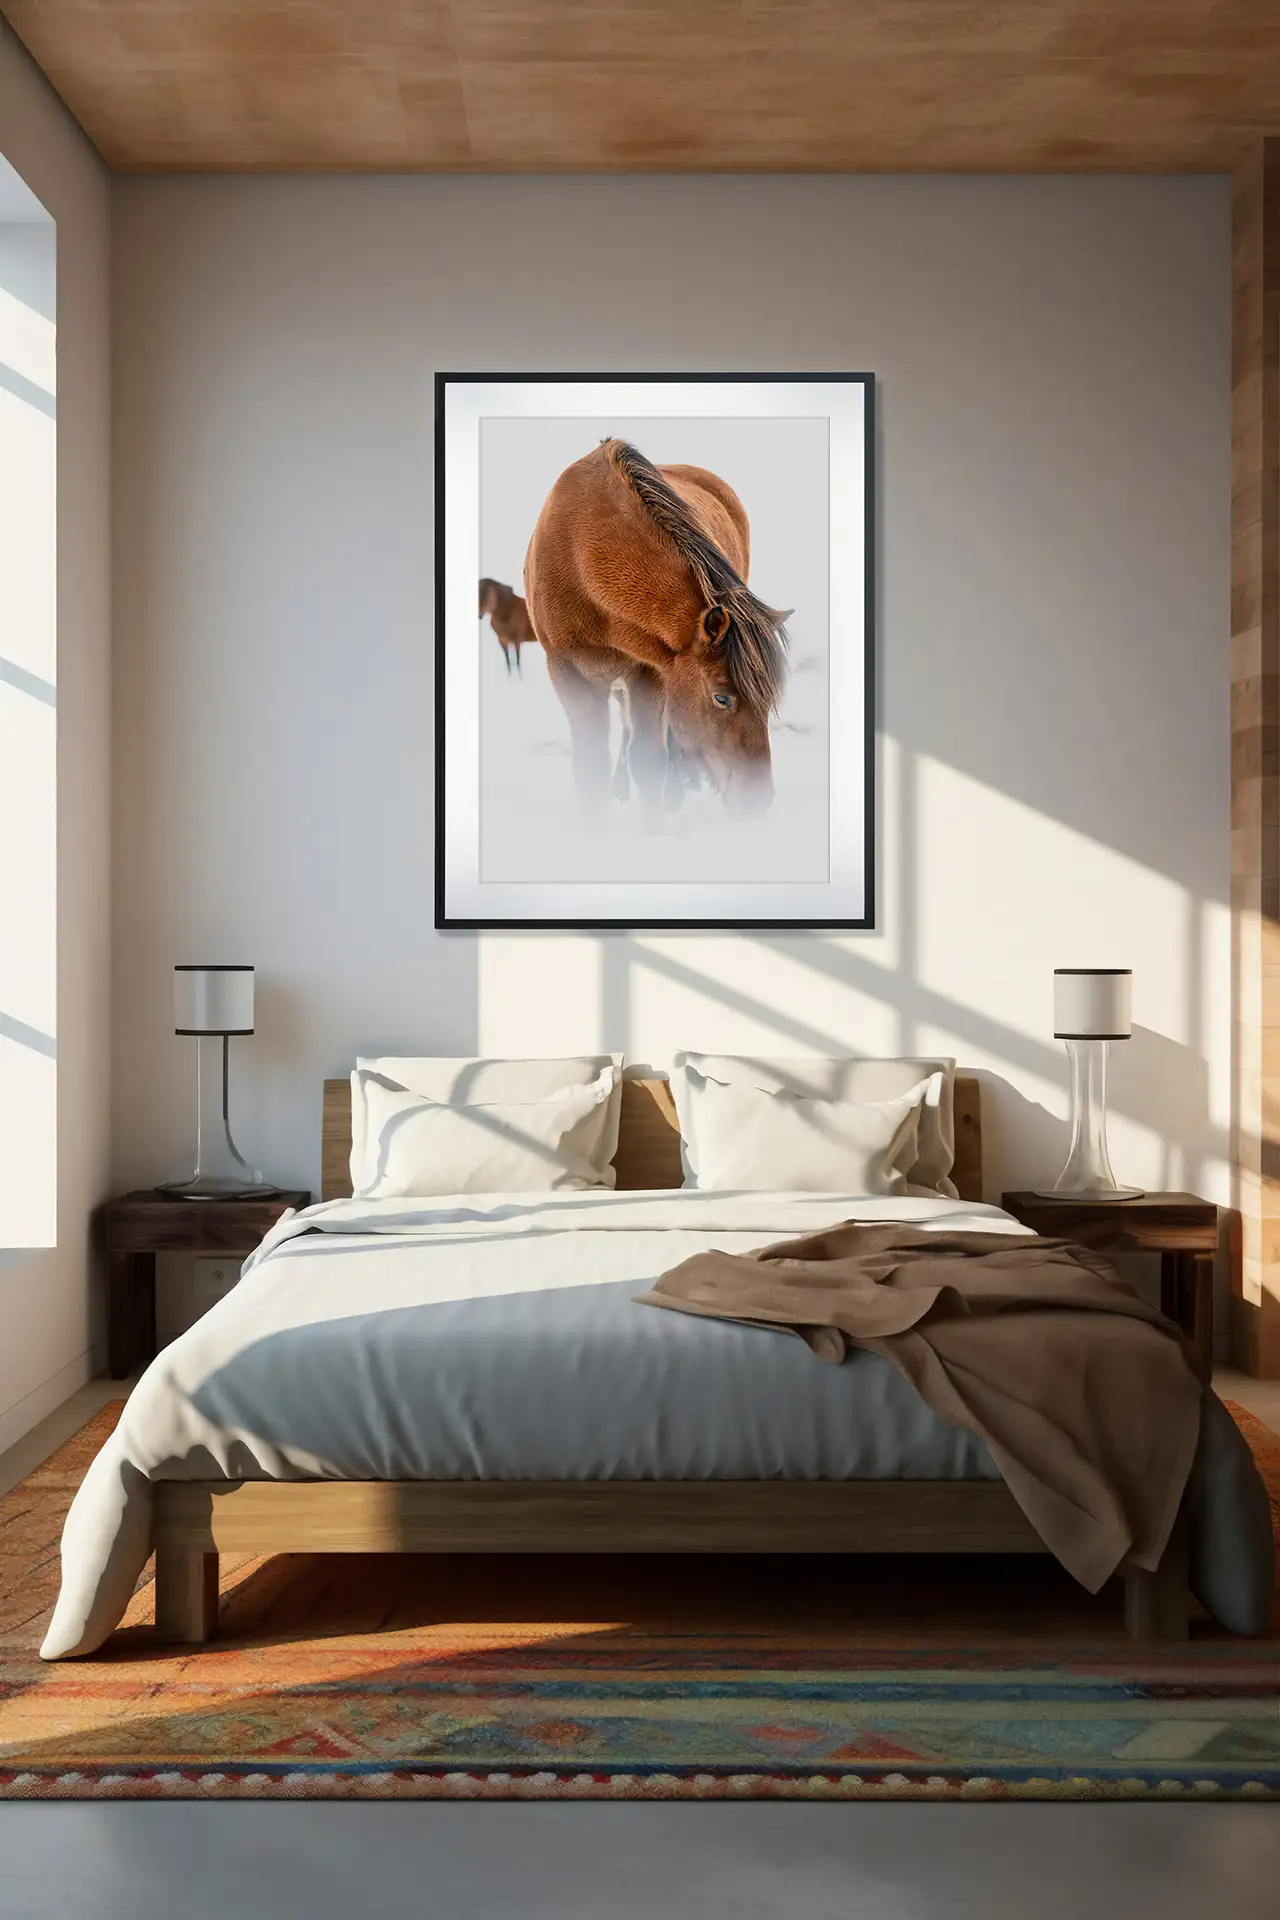 Decorated room with incredible photographic print hanging on the wall